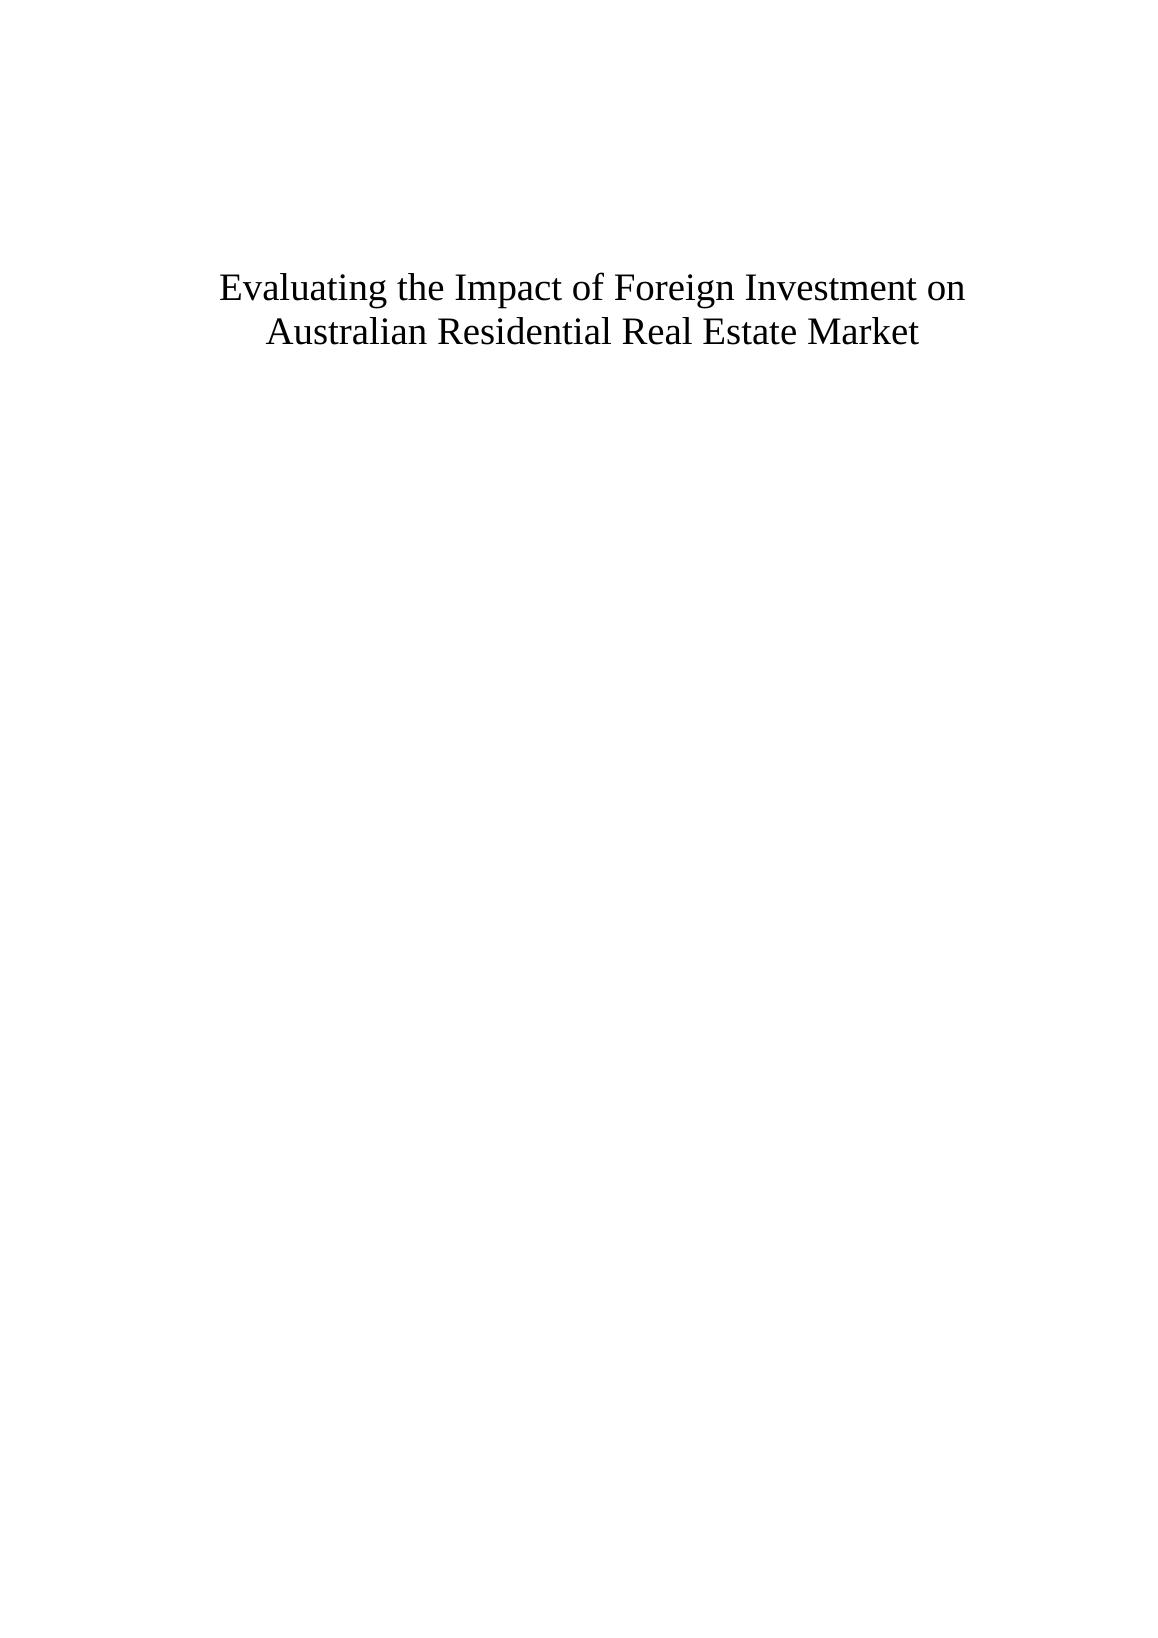 Evaluating the Impact of Foreign Investment - PDF_1